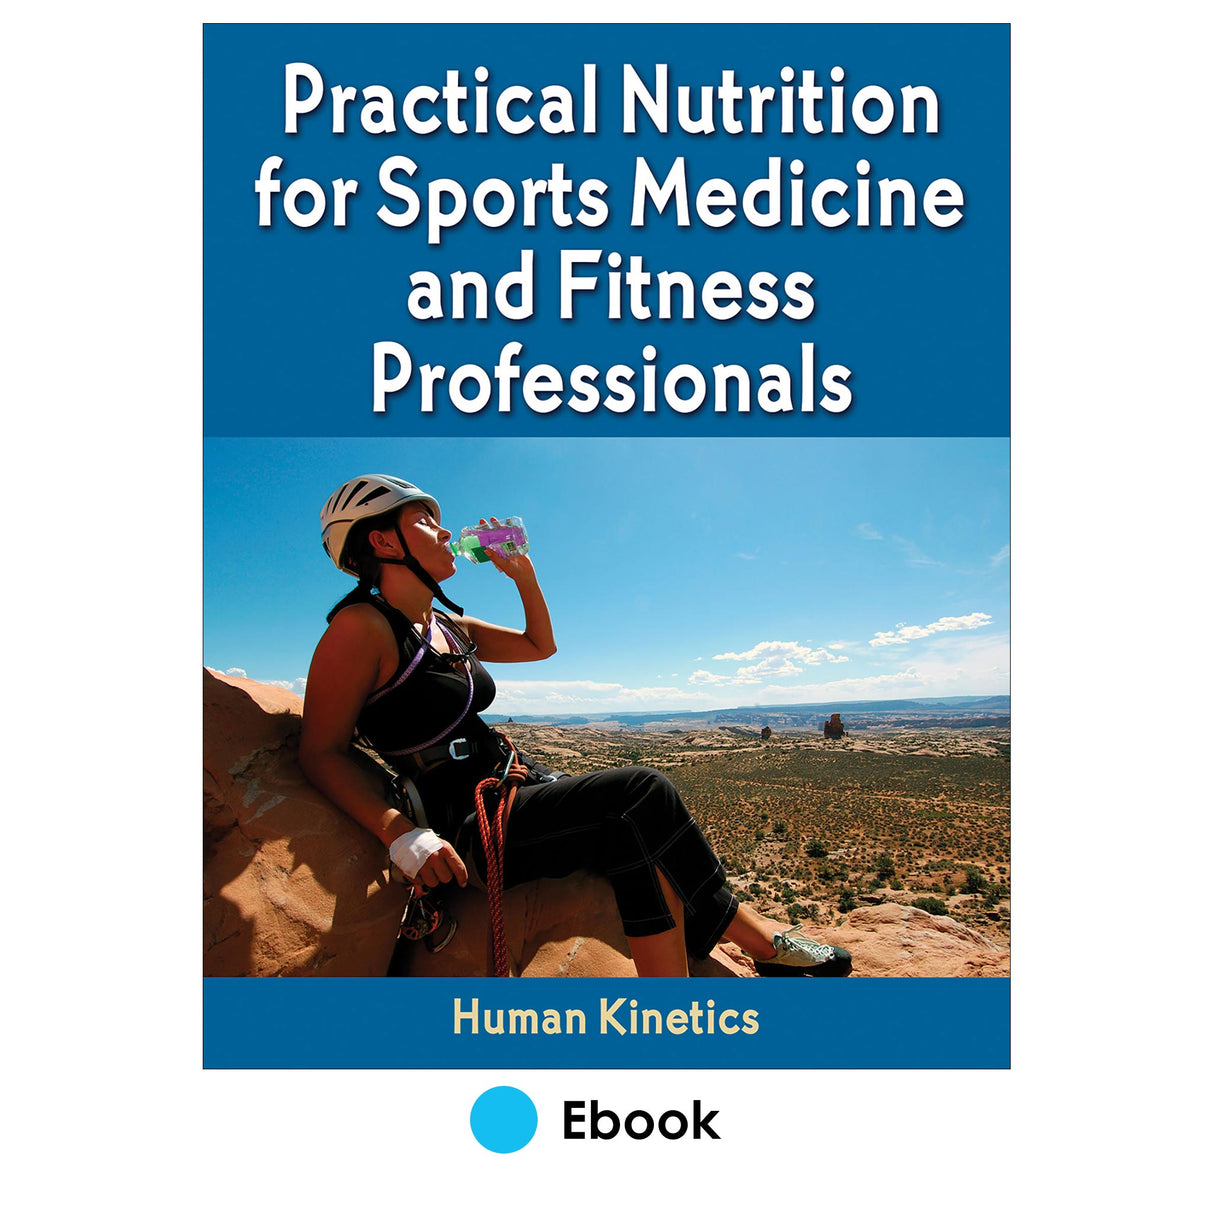 Practical Nutrition for Sports Medicine and Fitness Professionals PDF